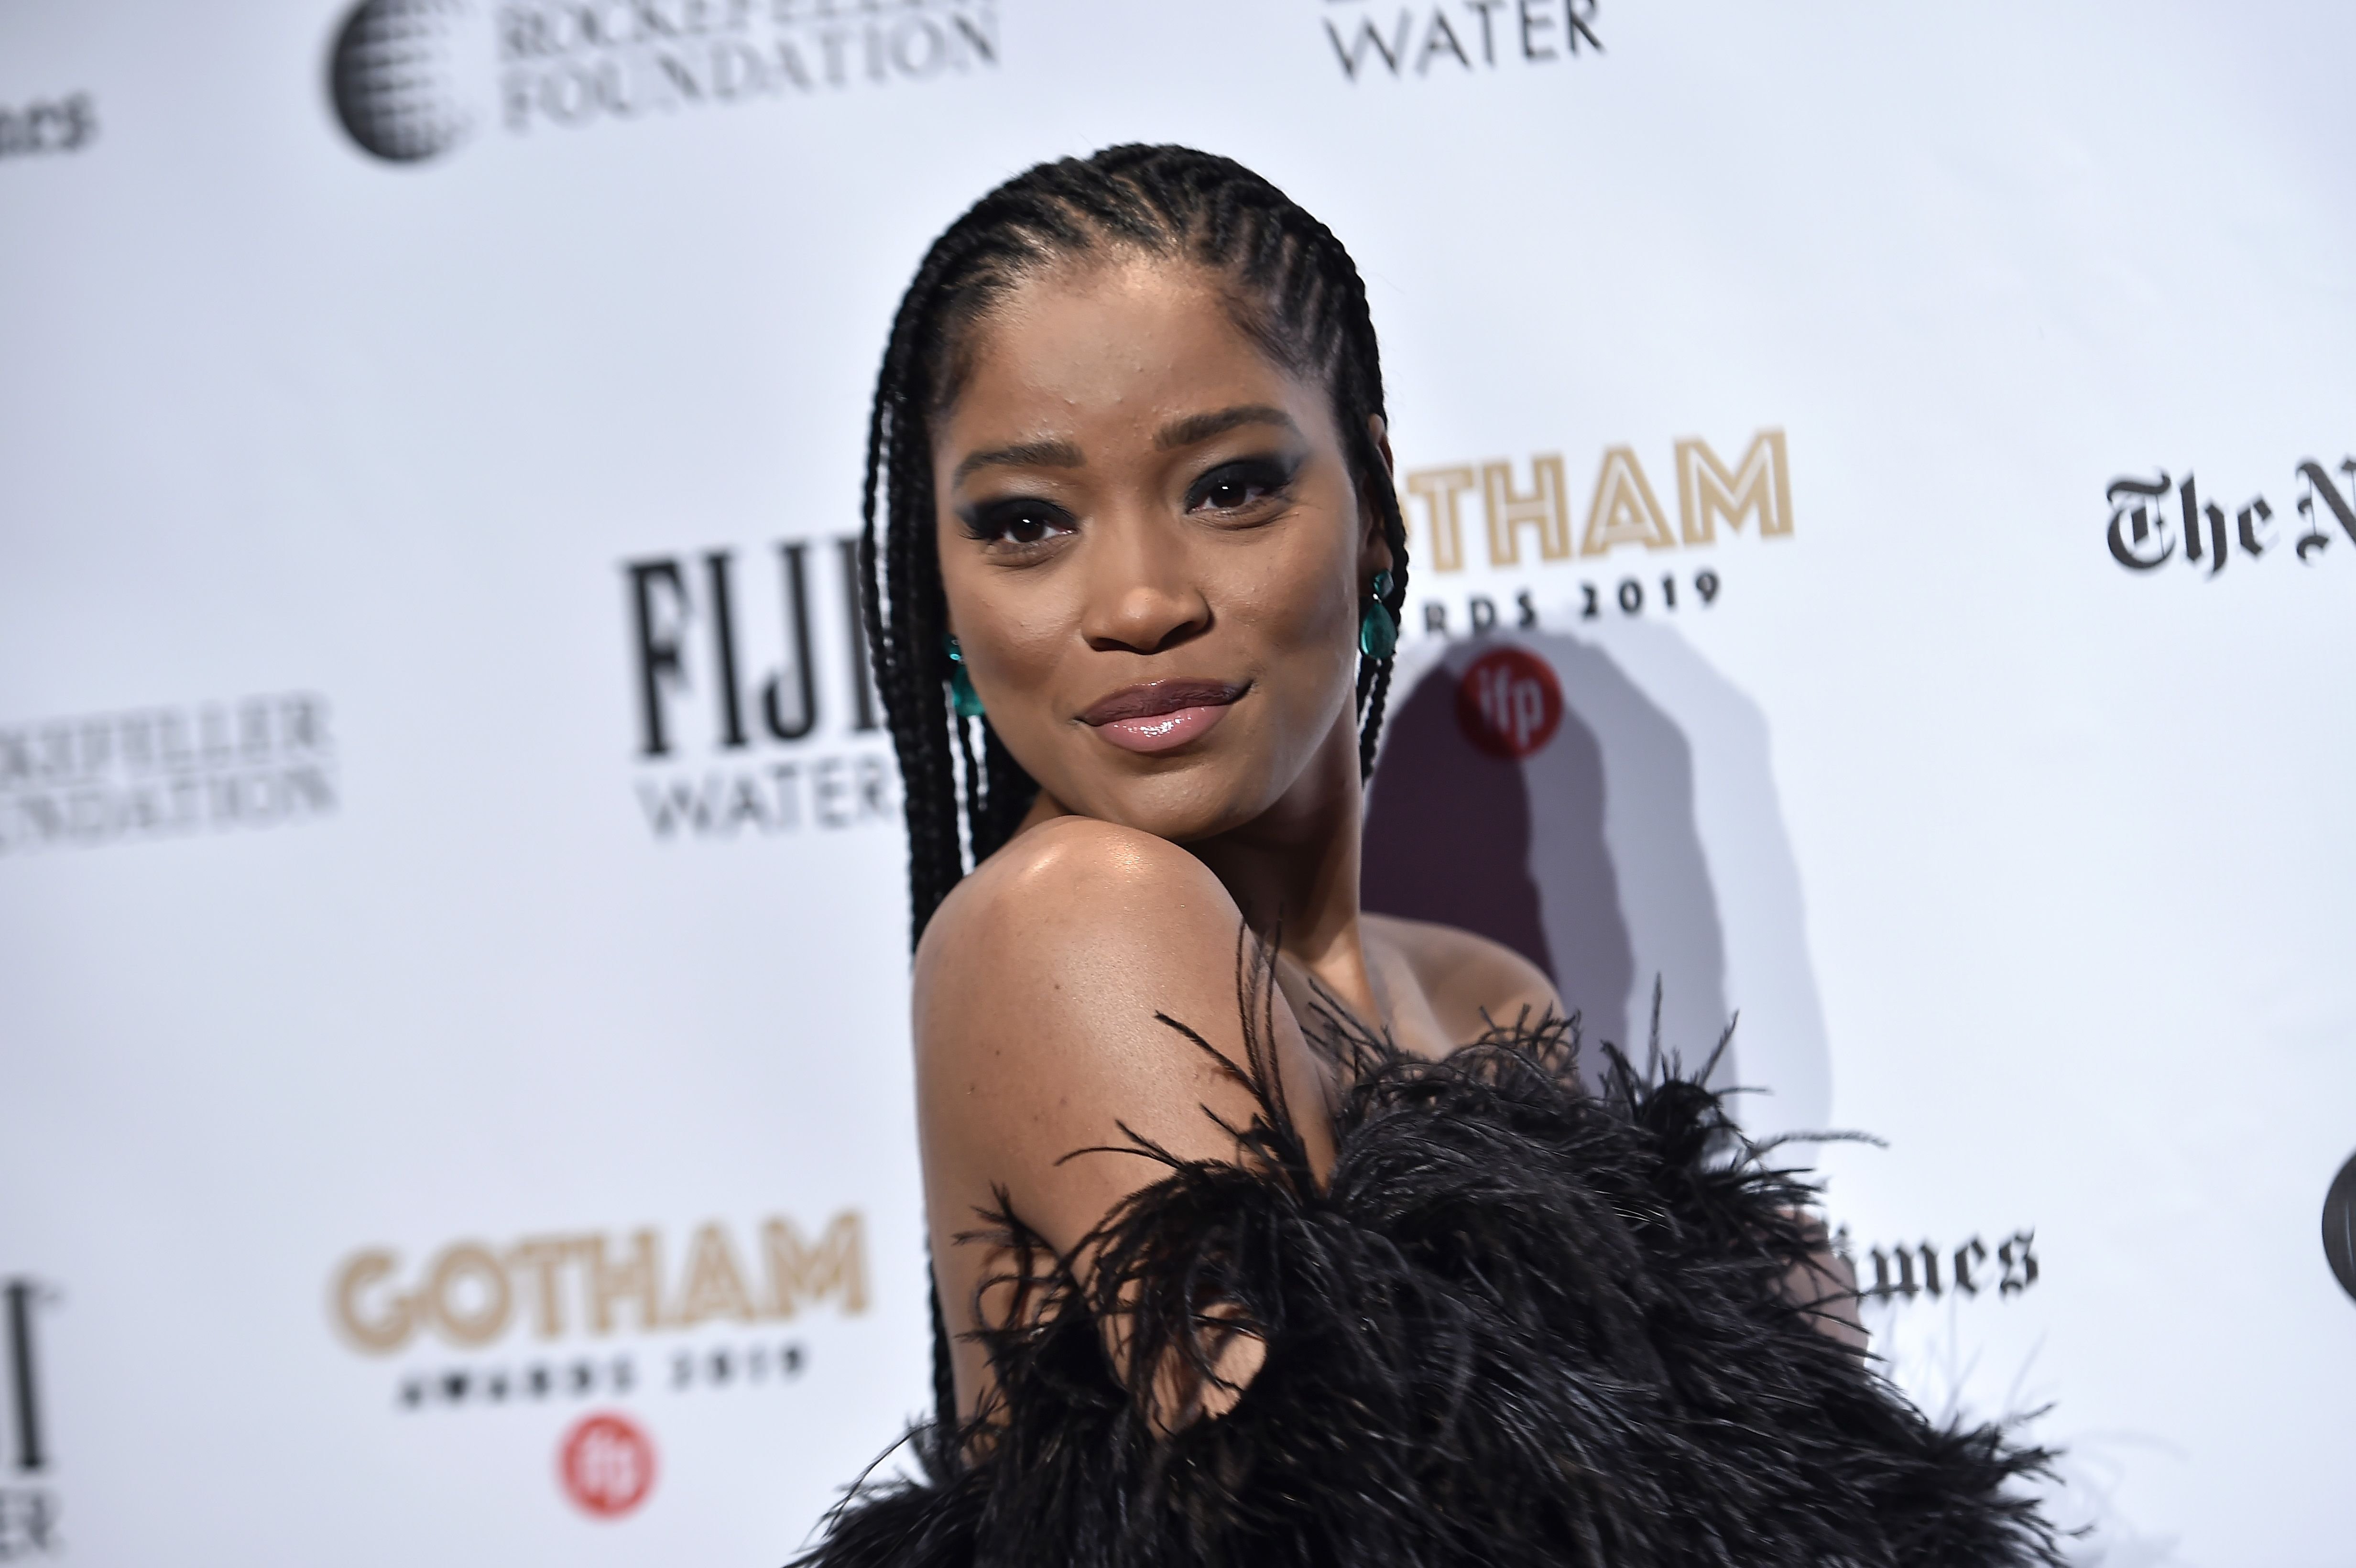 Keke Palmer during the 2019 IFP Gotham Awards at Cipriani Wall Street on December 02, 2019 in New York City. | Source: Getty Images